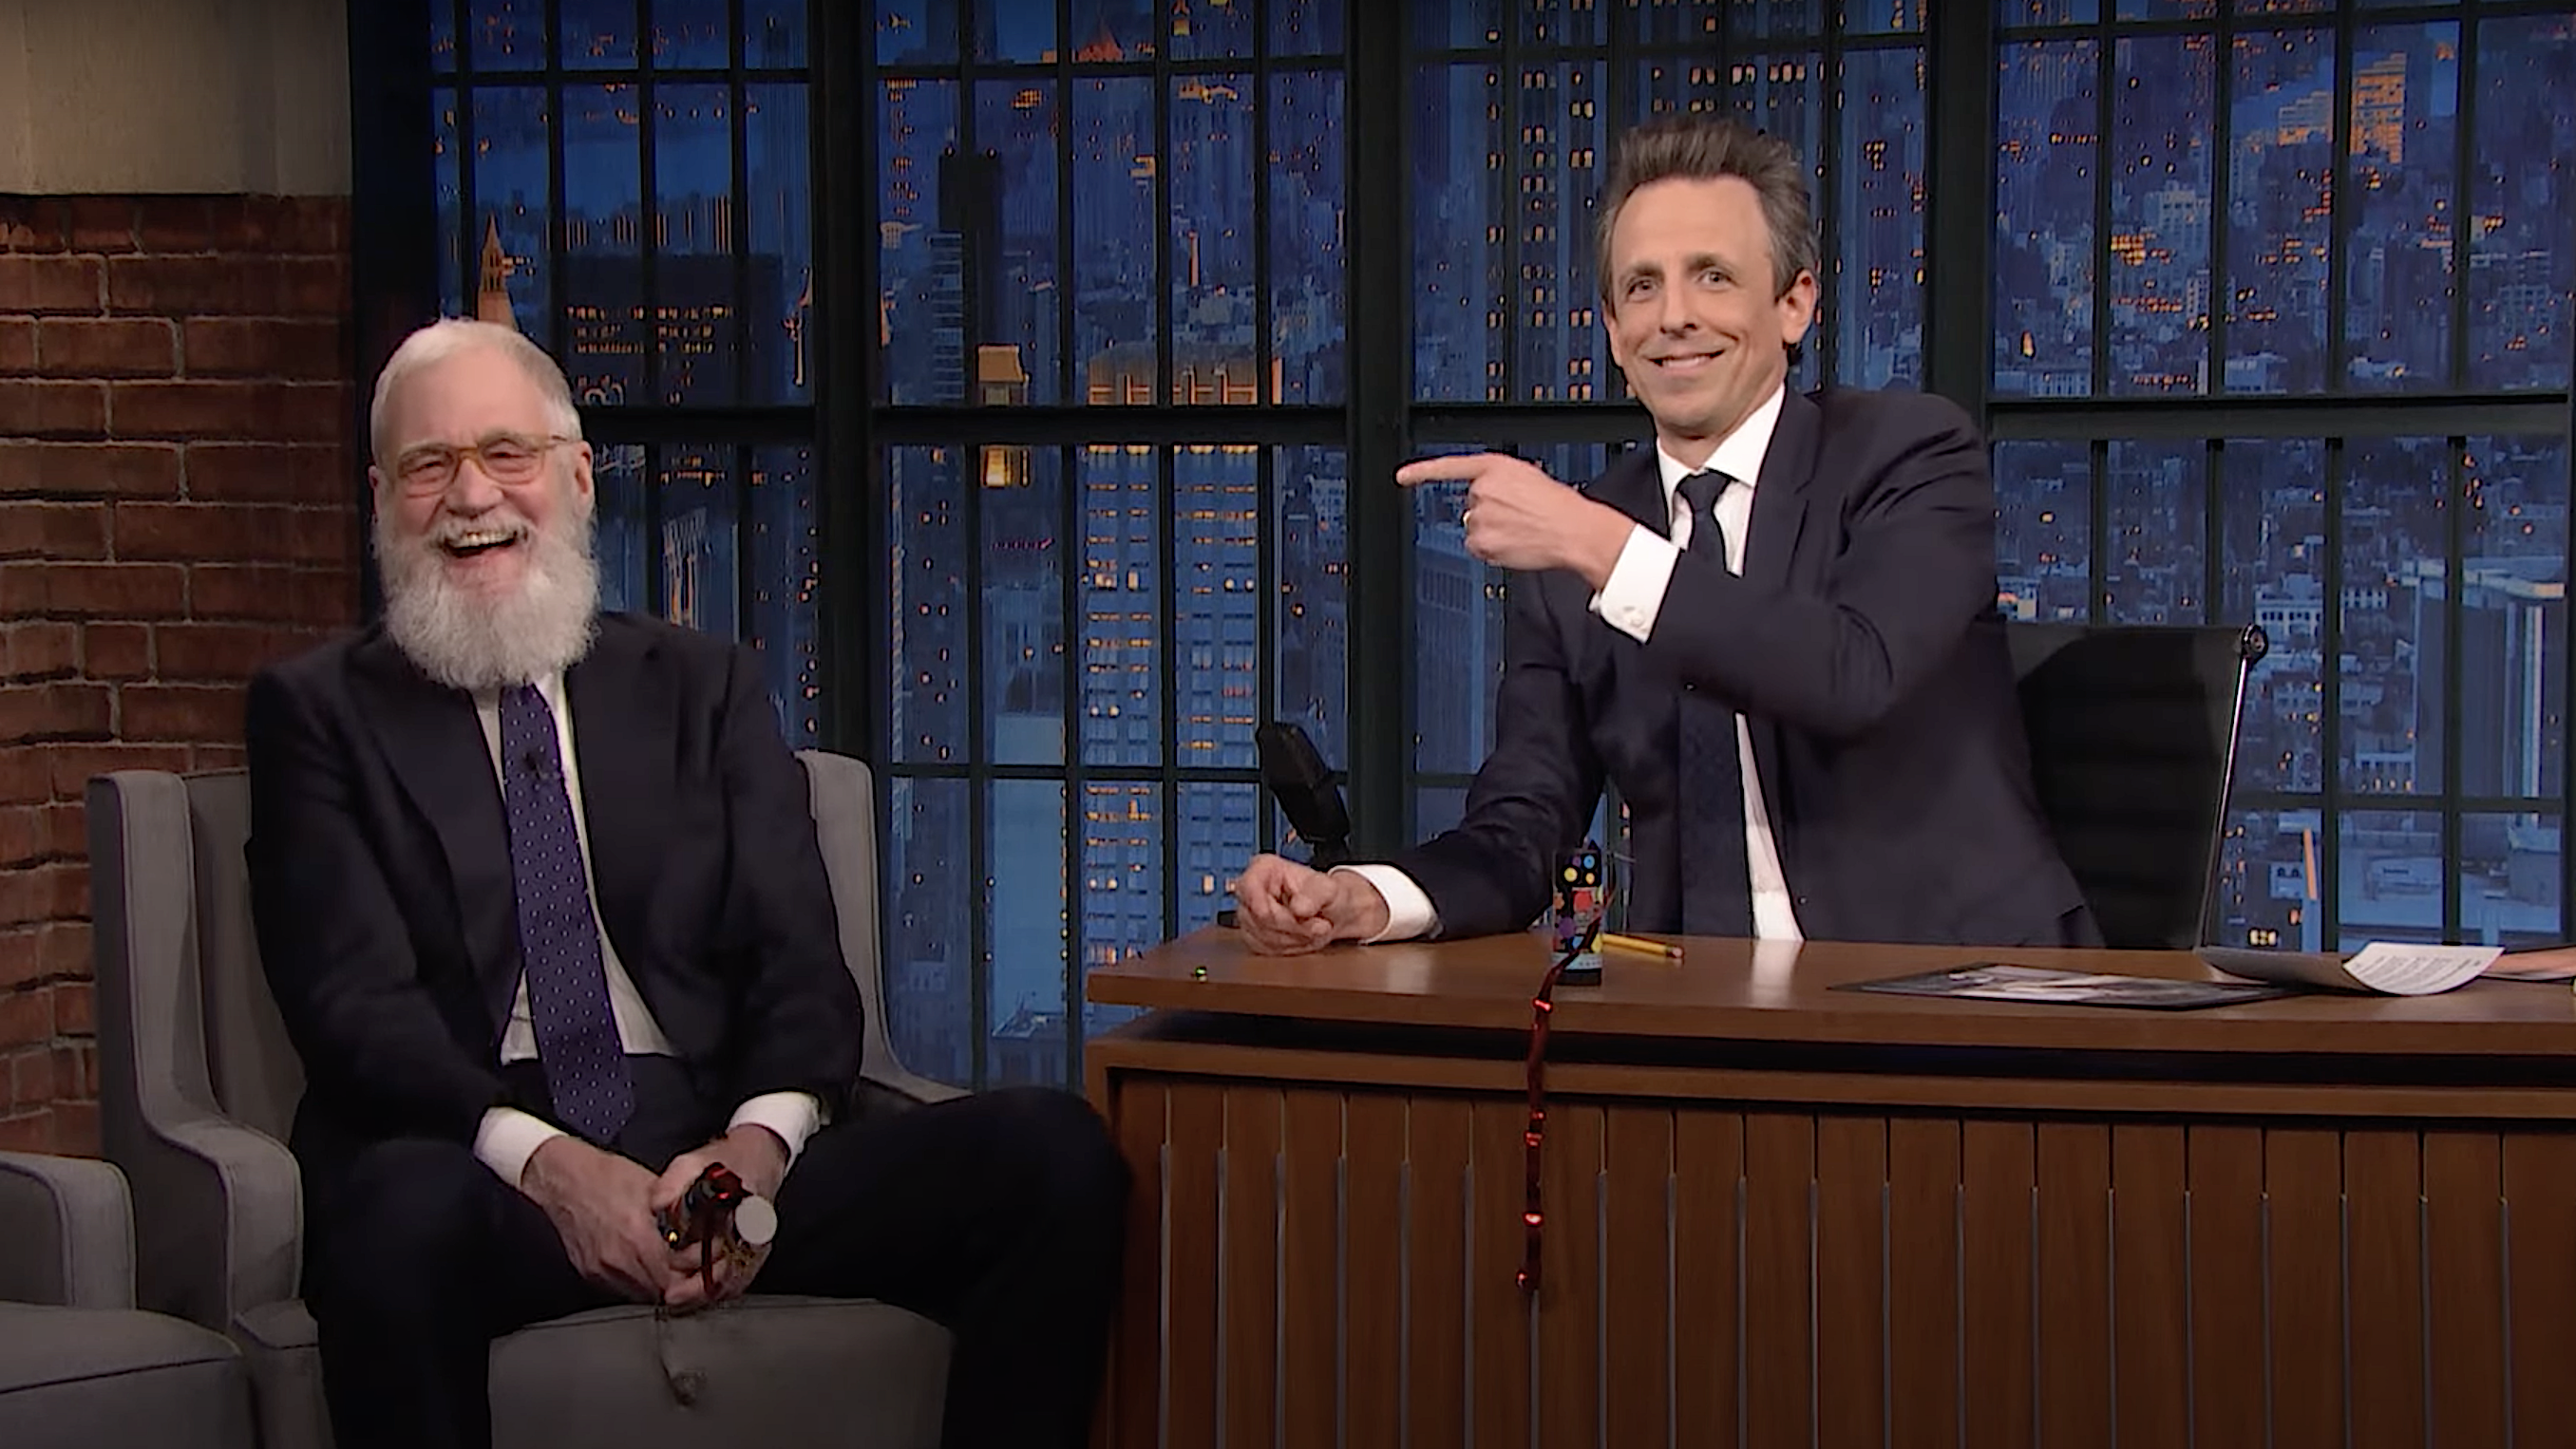 David Letterman thanks Seth Meyers for reminding him it was Late Night‘s 40th anniversary